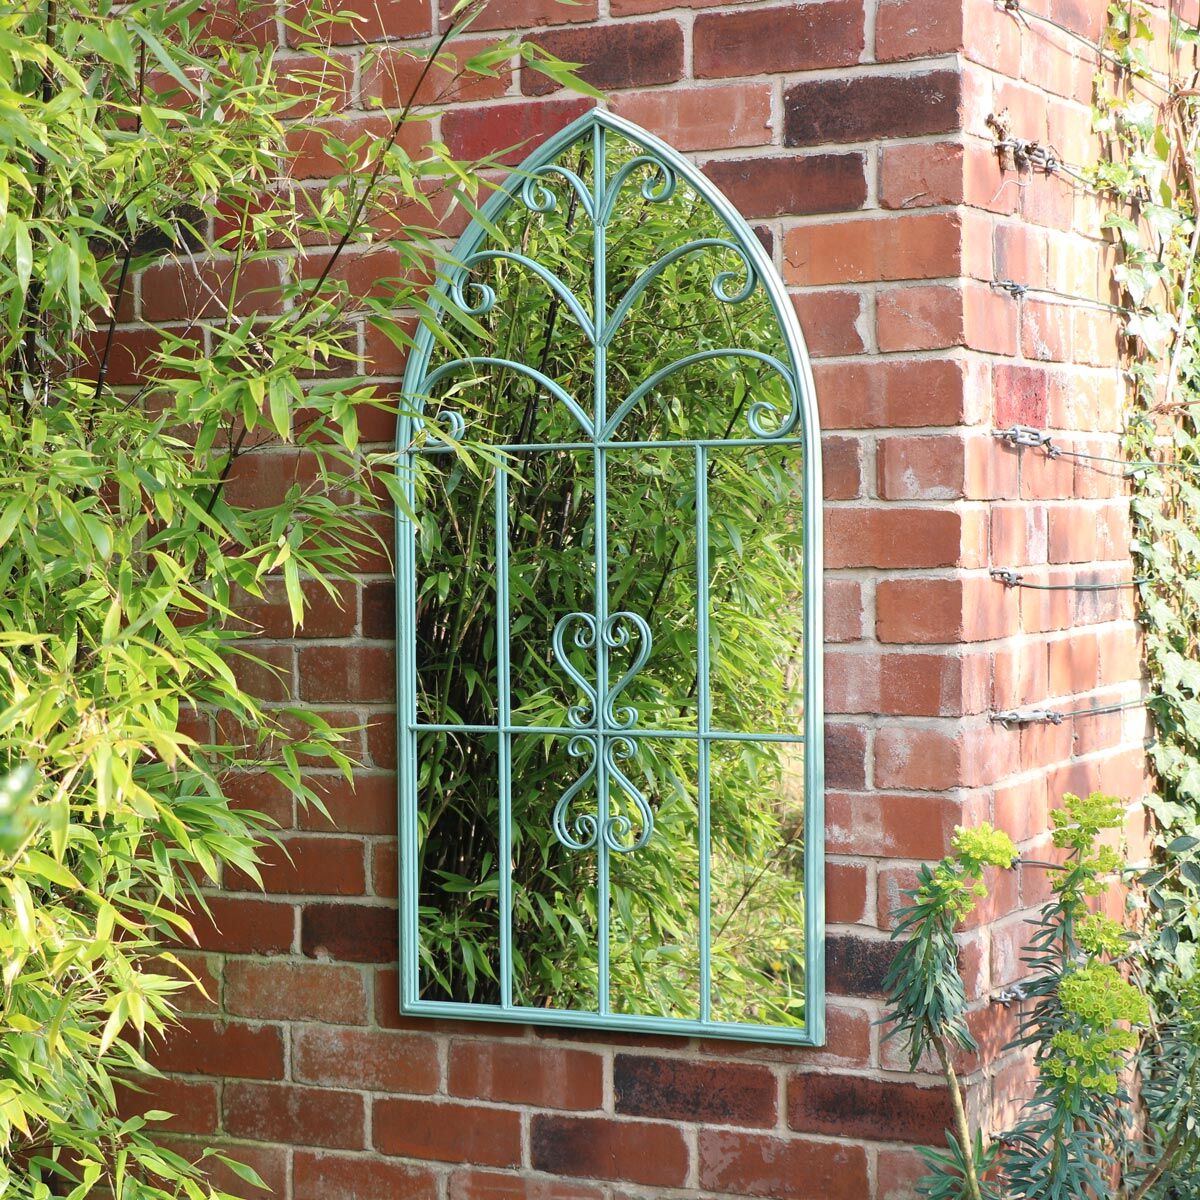 Antique Sage Green Arched Window Mirror 120cm x 60cm Material: Metal, Glass, Iron